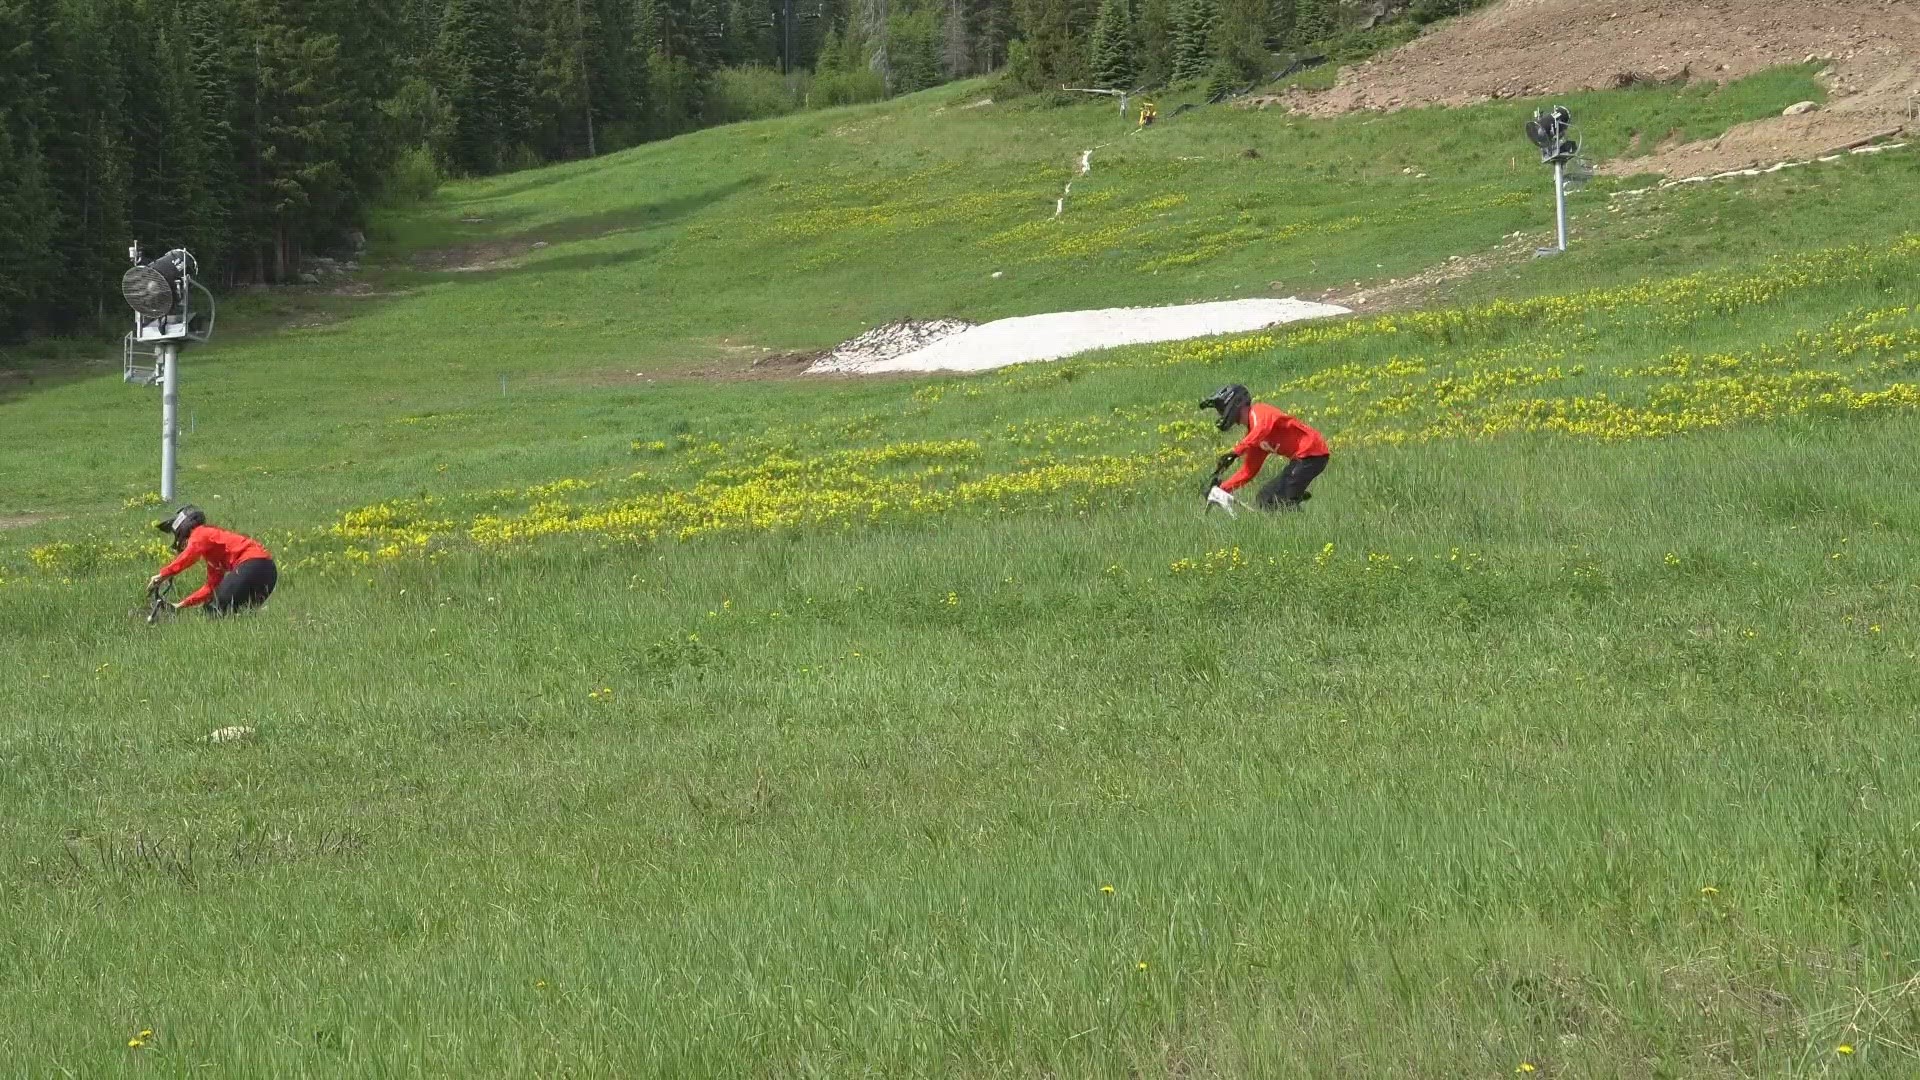 Ski areas are seeing more people mountain bike in the summer and that’s putting a lot more importance on having a bike patrol team to help keep people safe.